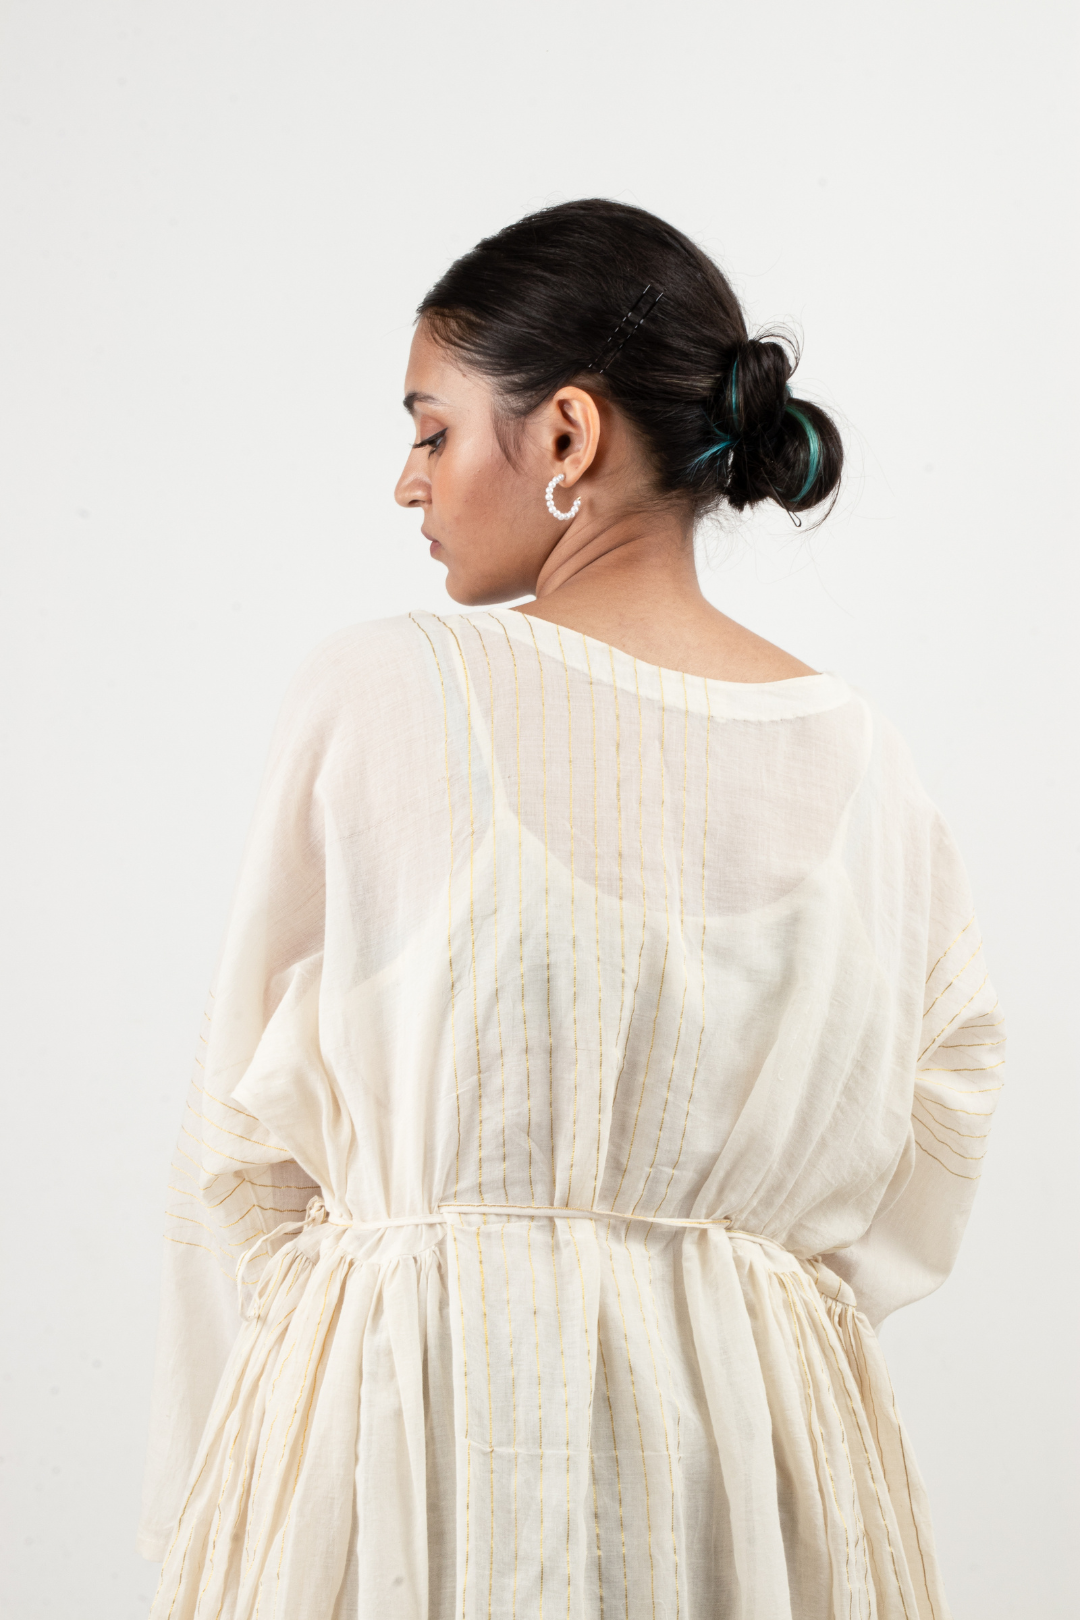 YUGA | OffWhite Dress with Gold detail | Paliam